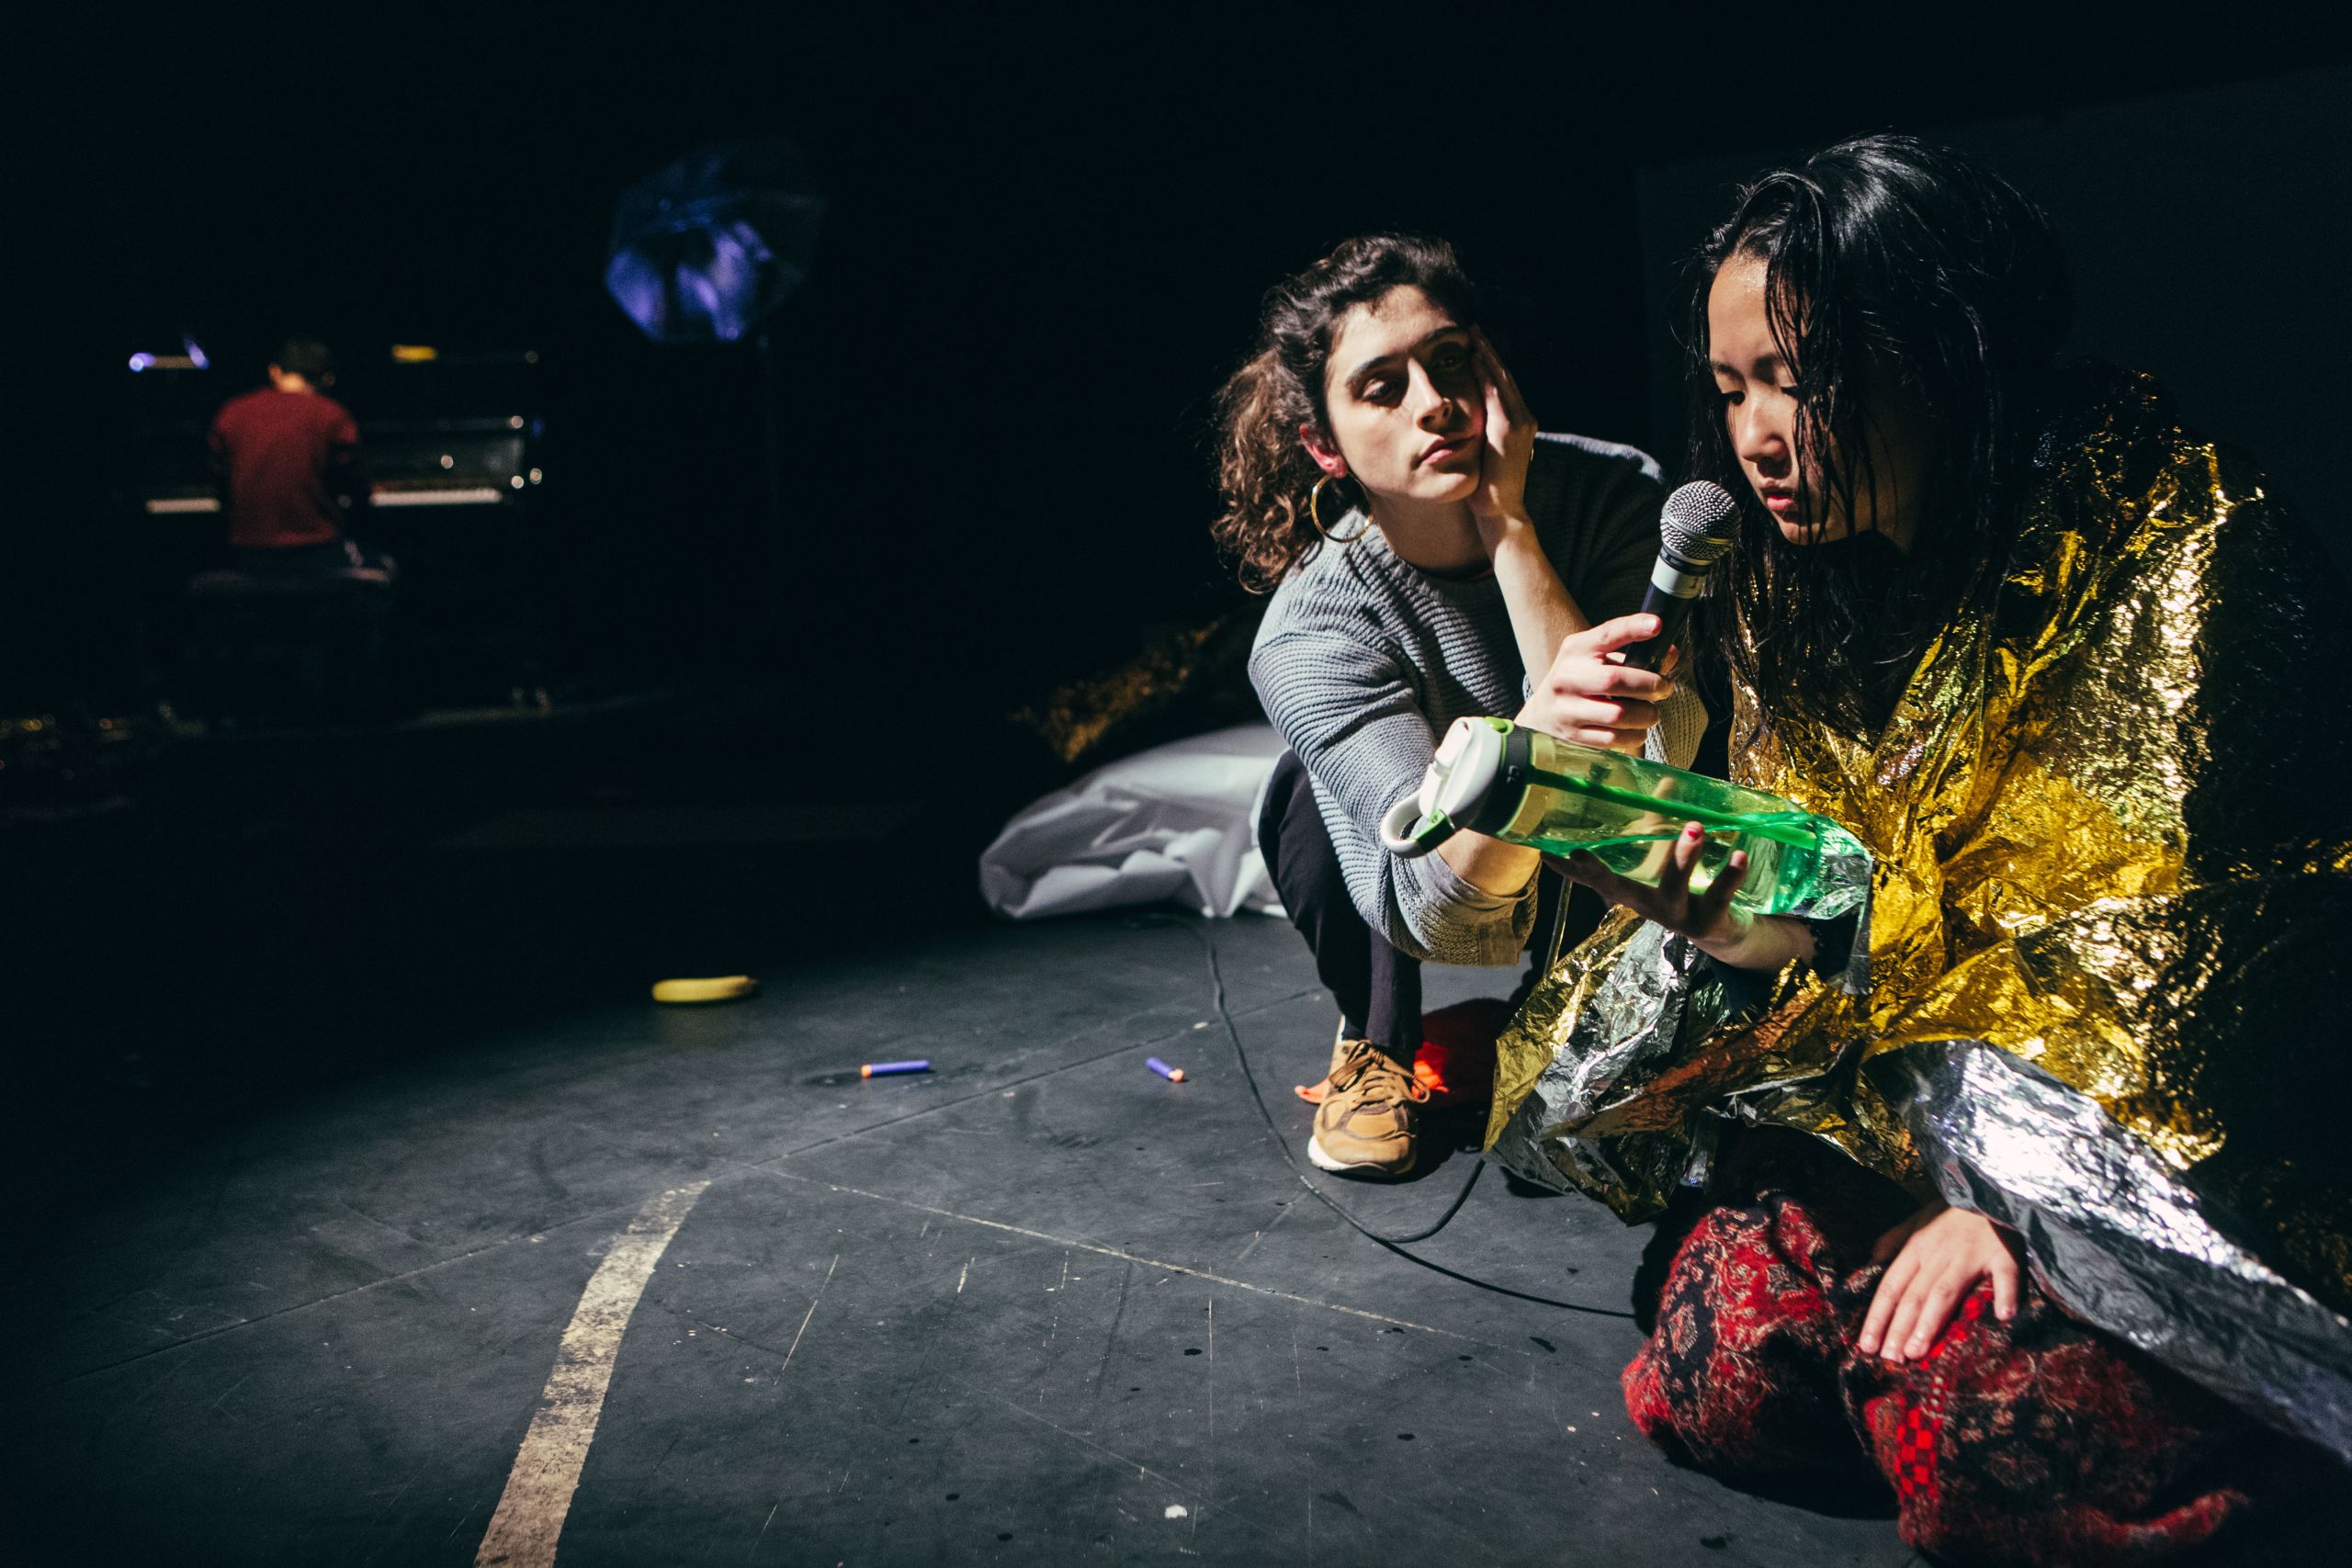 photo of a girl on stage wearing a thermal blanket and holding a plastic bottle, while another girl holds a microphone to her mouth